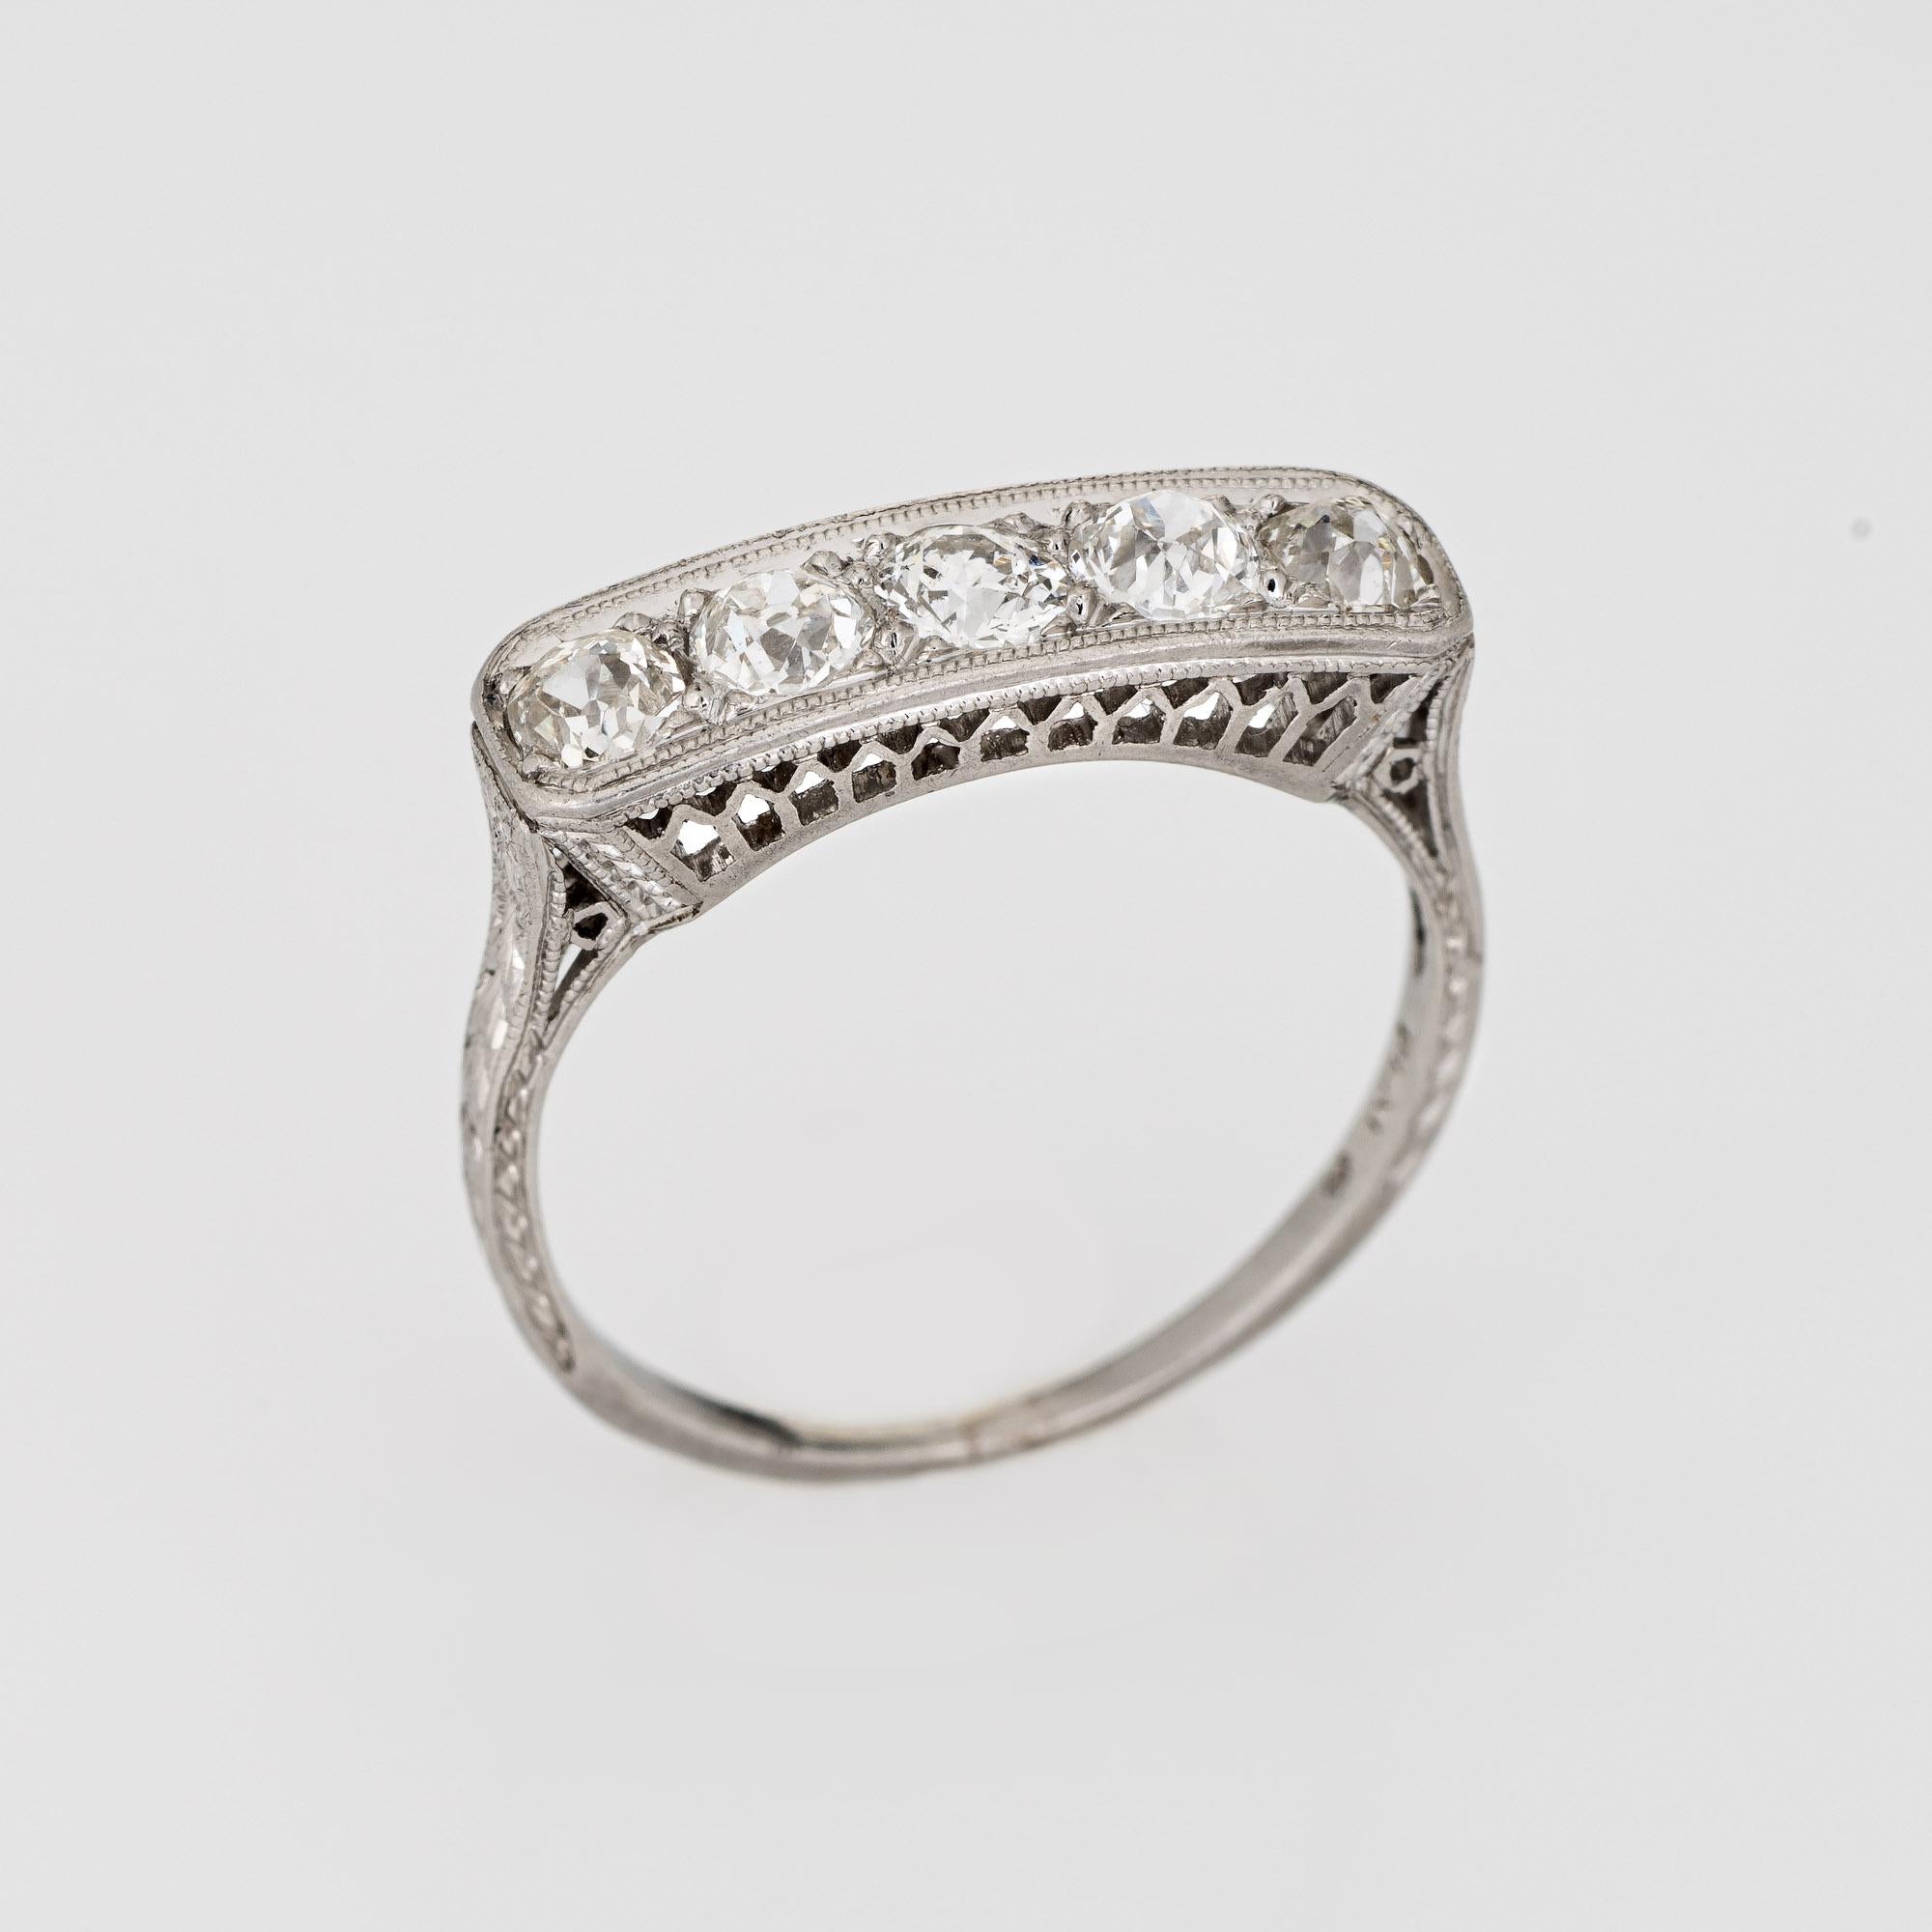 Finely detailed vintage Art Deco 5 stone diamond ring (circa 1920s to 1930s) crafted in platinum. 

Five old mine cut diamonds are estimated at 0.15 carats each and total an estimated 0.75 carats (estimated at H-I color and VS2-SI1 clarity). 